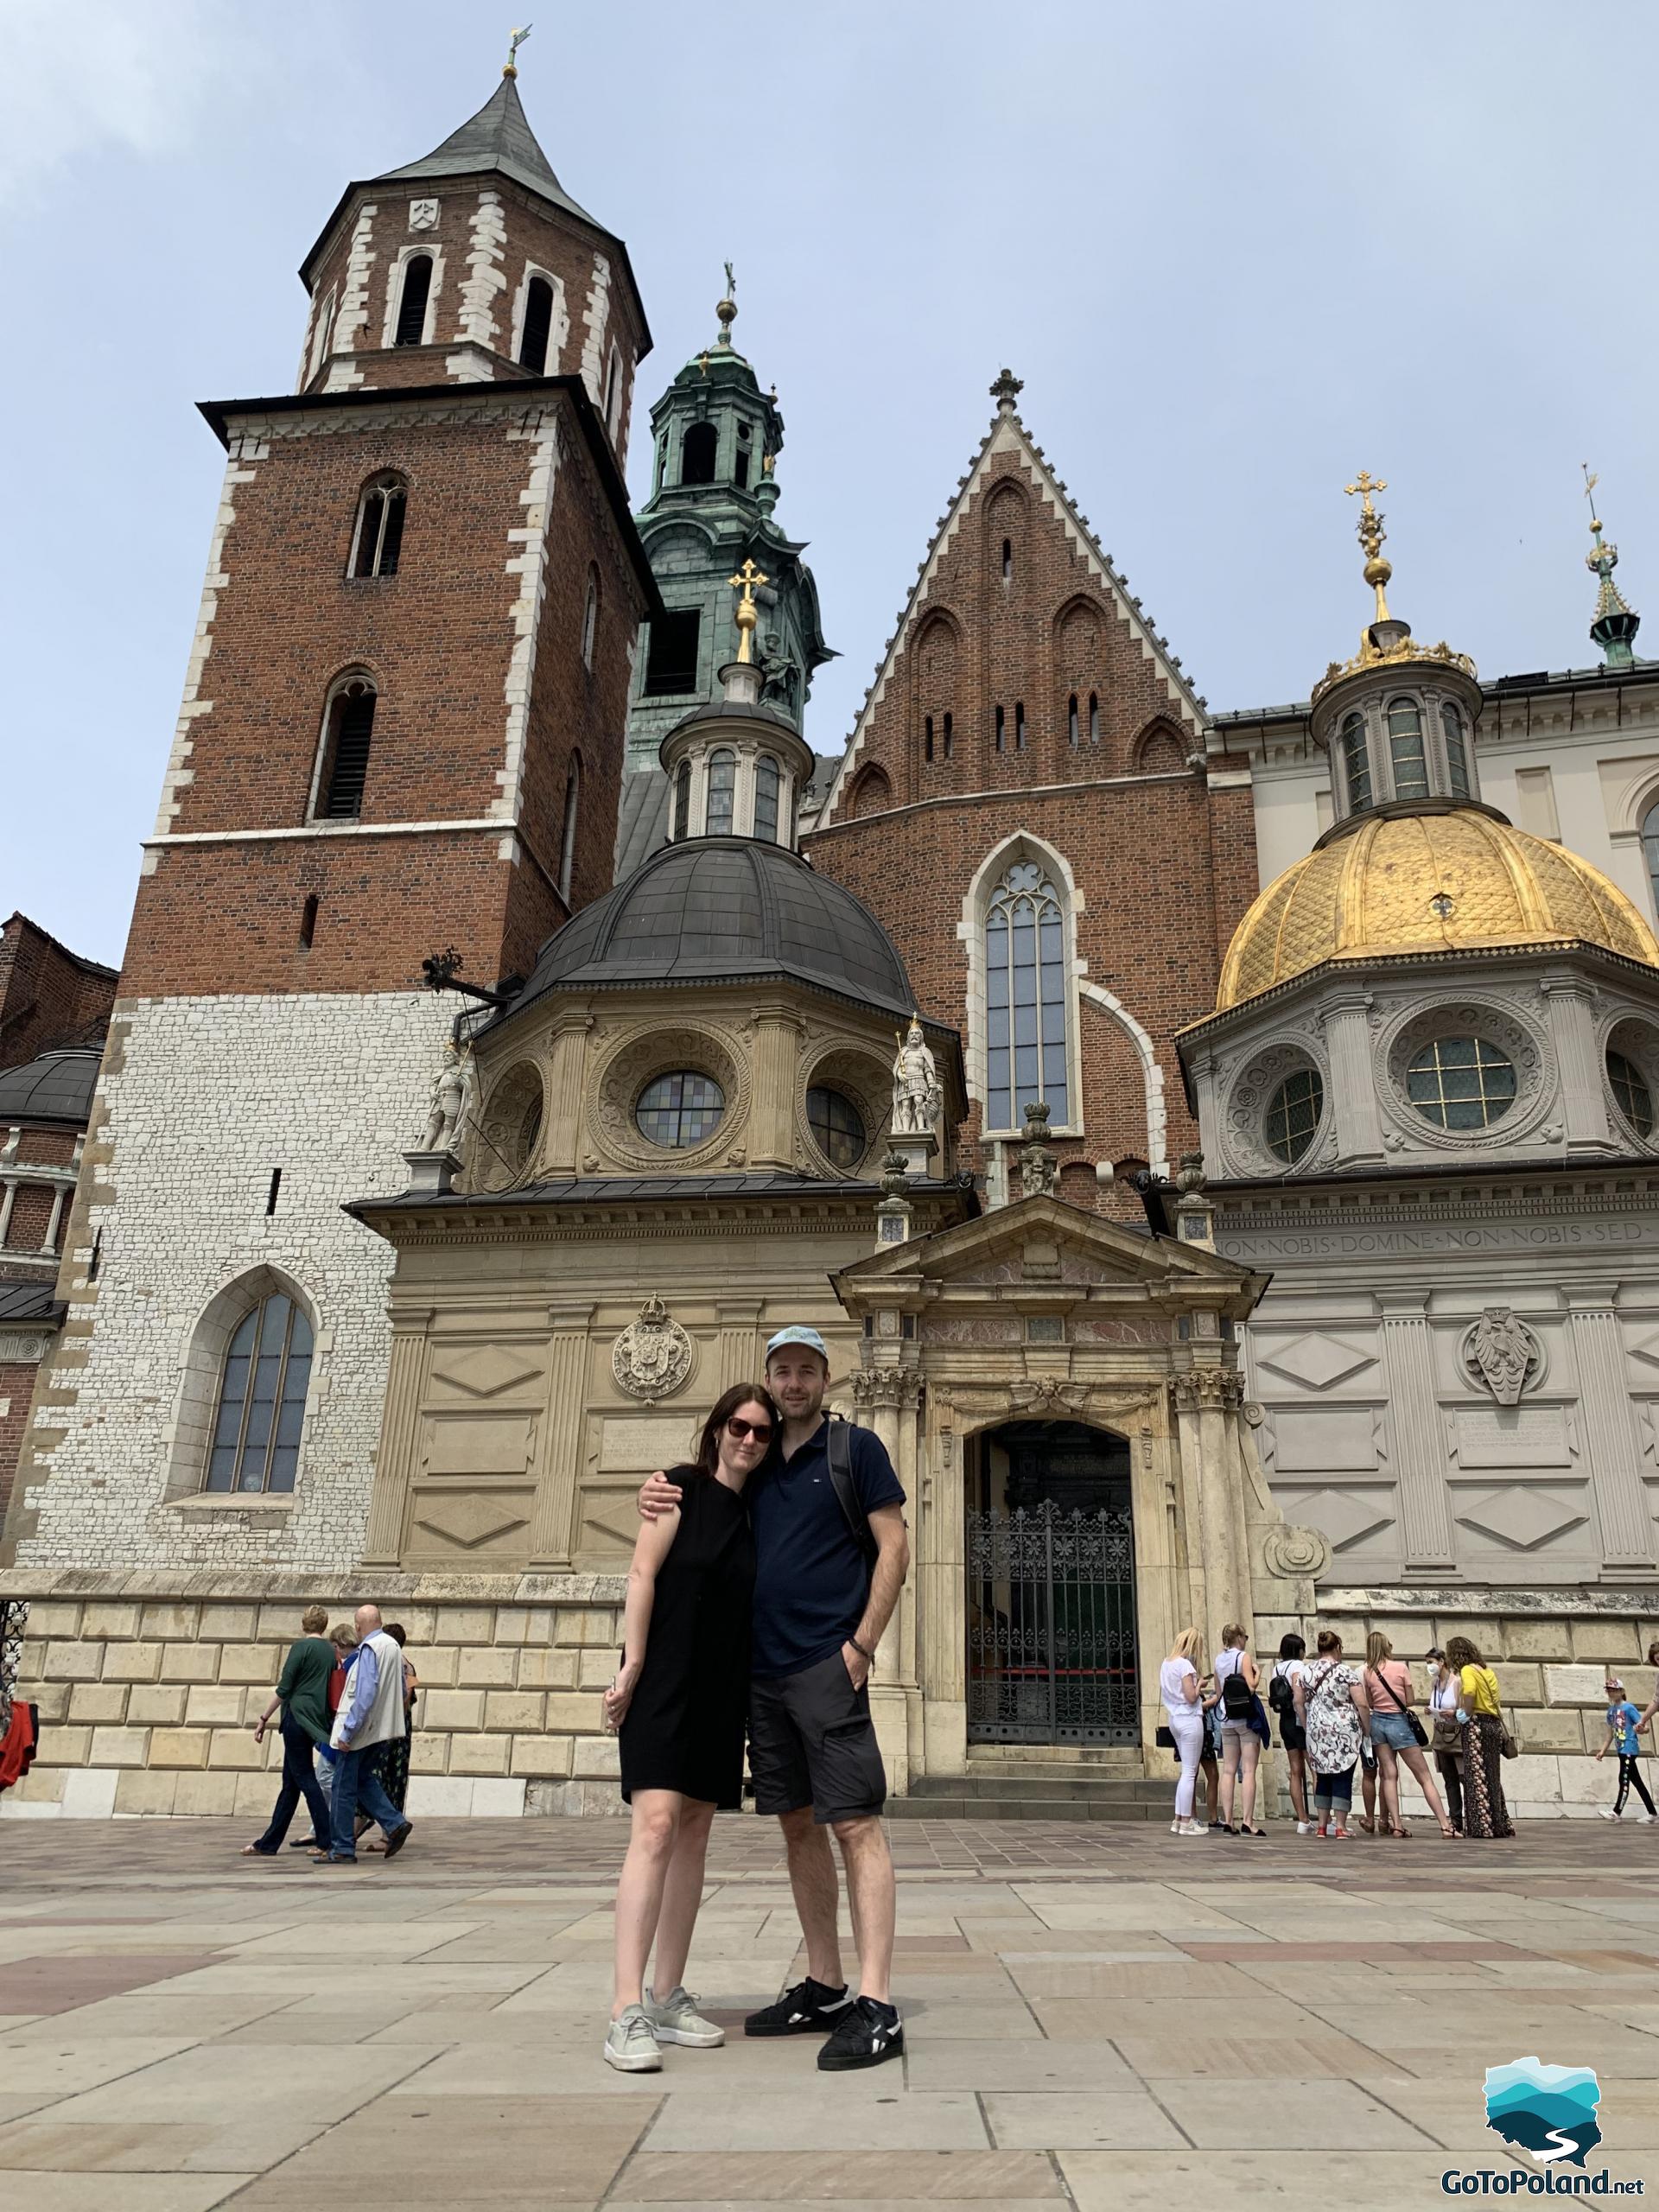 A couple is standing in front of the cathedral complex